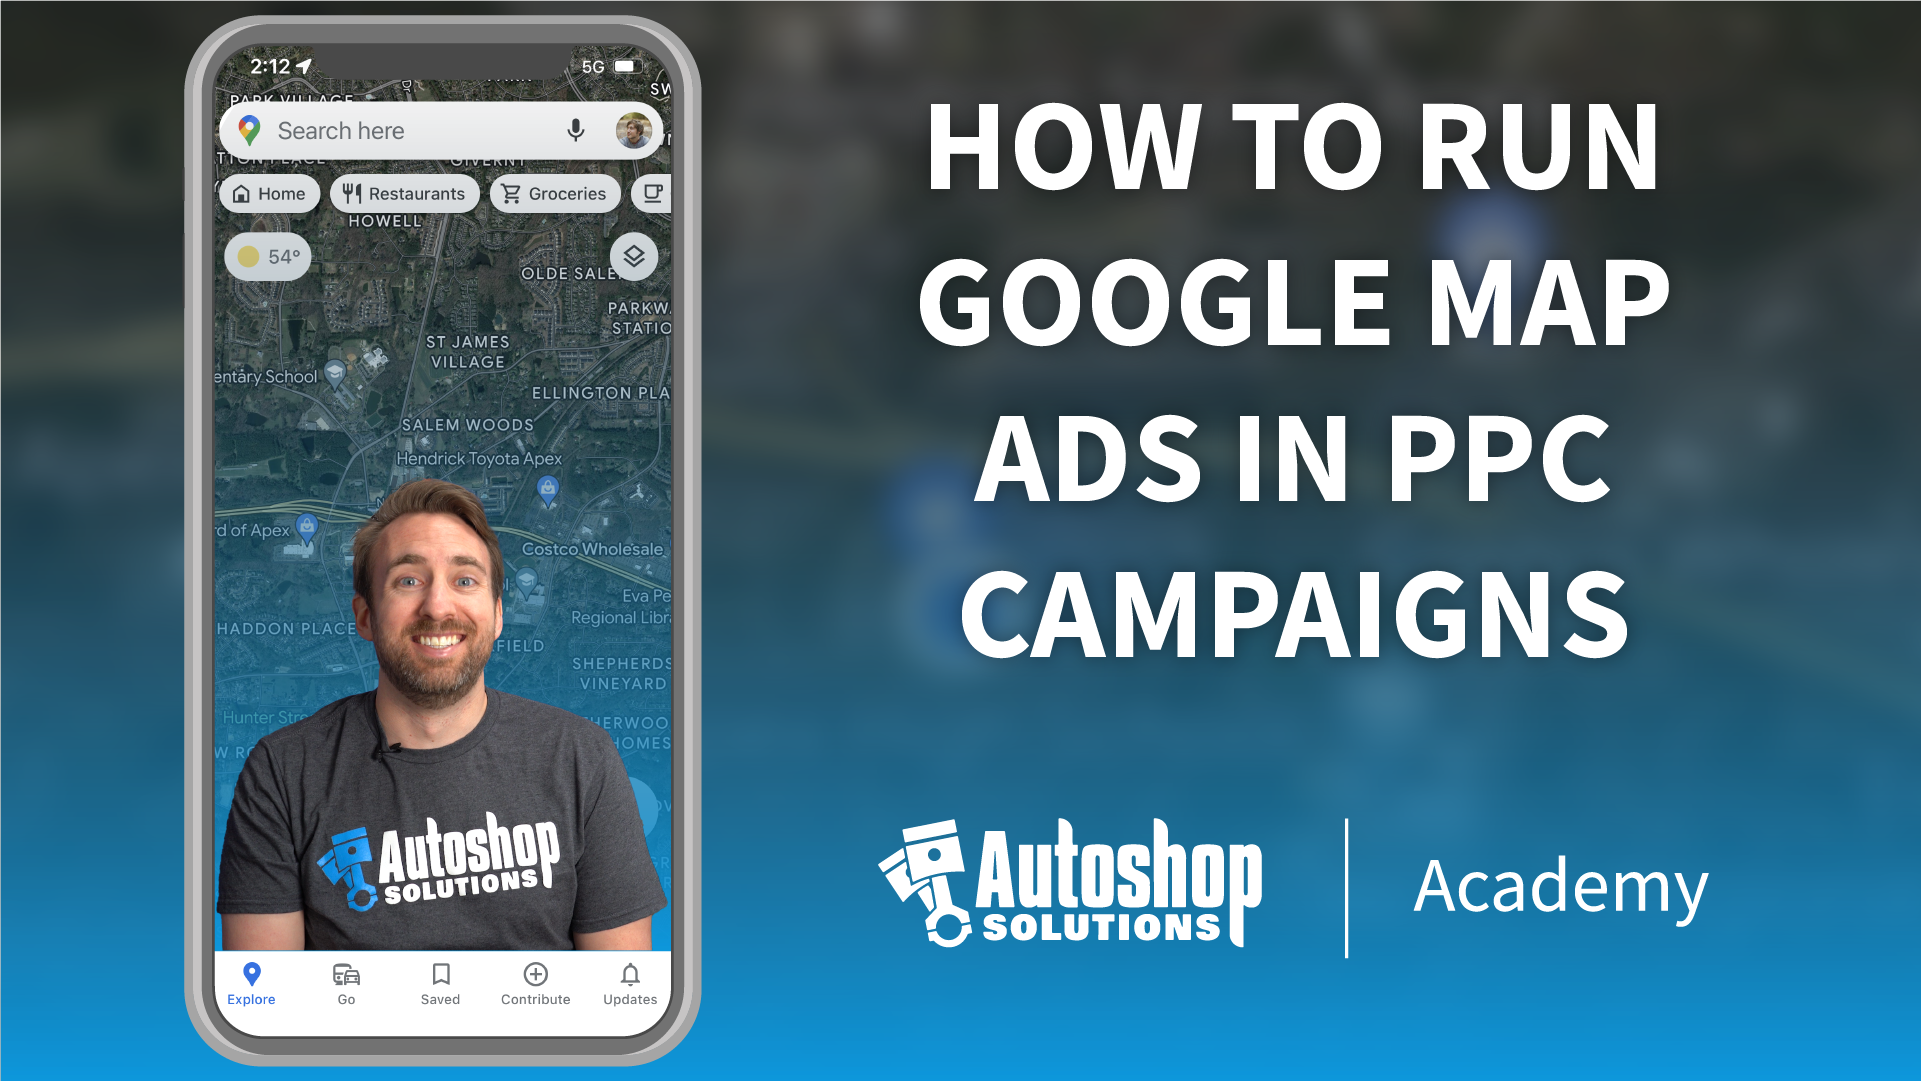 How to Run Google Map Ads in PPC Campaigns